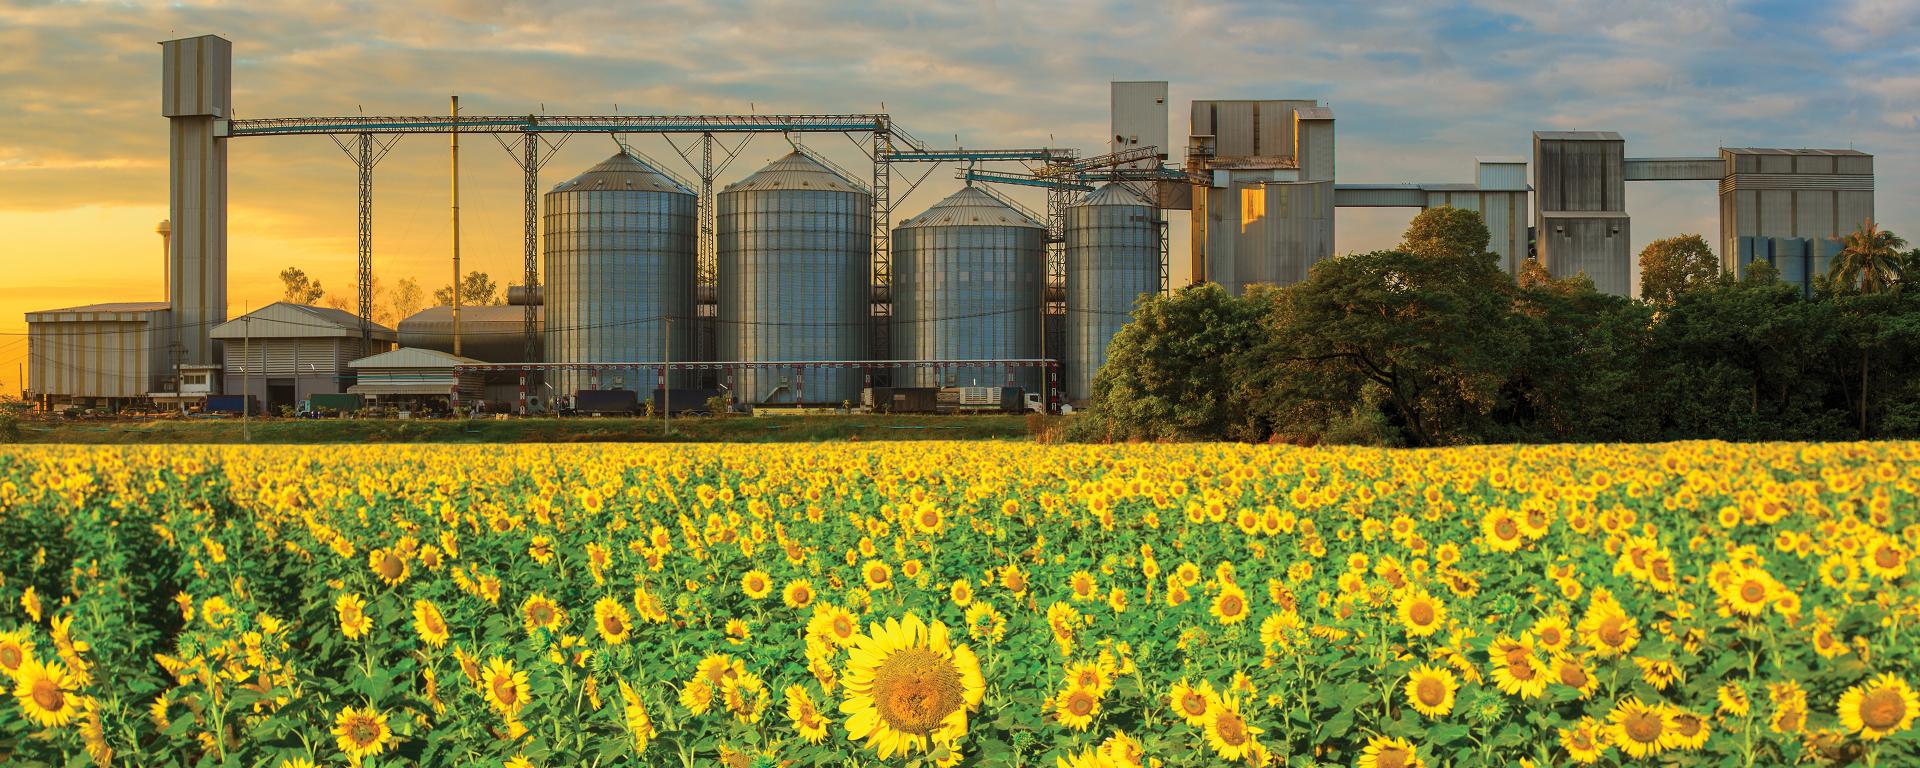 Sunflower field in front of a several silos